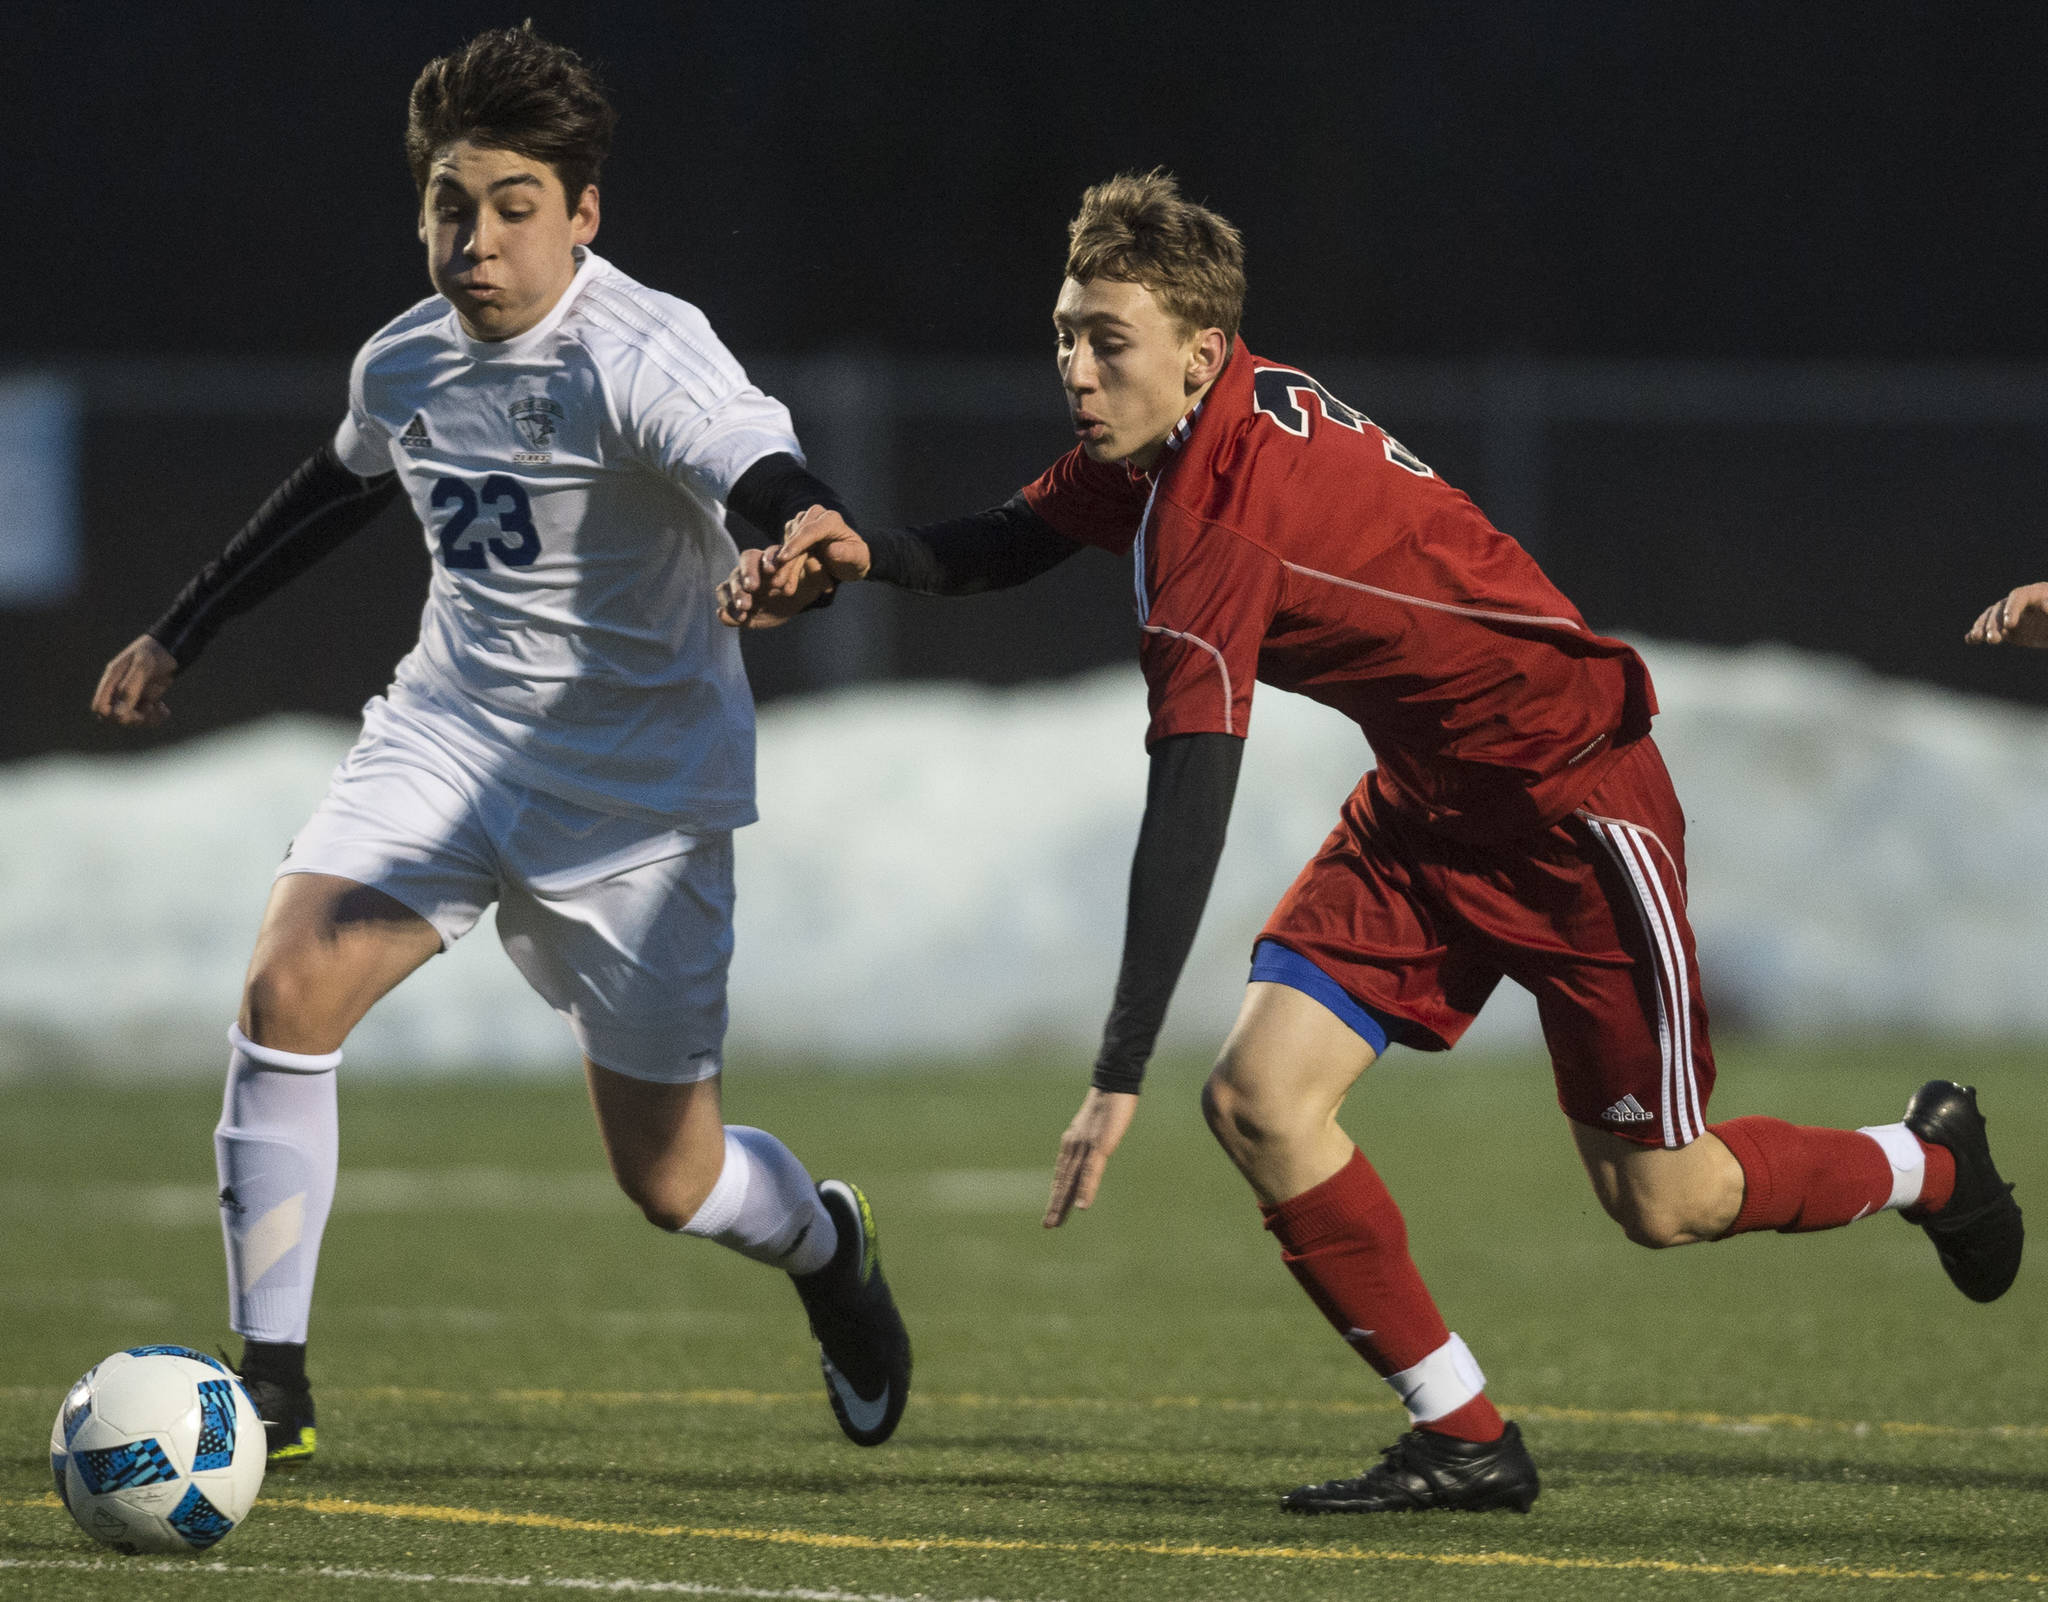 Thunder Mountain’s Franco Vidal, left, races Juneau-Douglas’ Aidan Hopson to the ball during their first match of the season at TMHS on Friday, March 31, 2017. (Michael Penn | Juneau Empire)